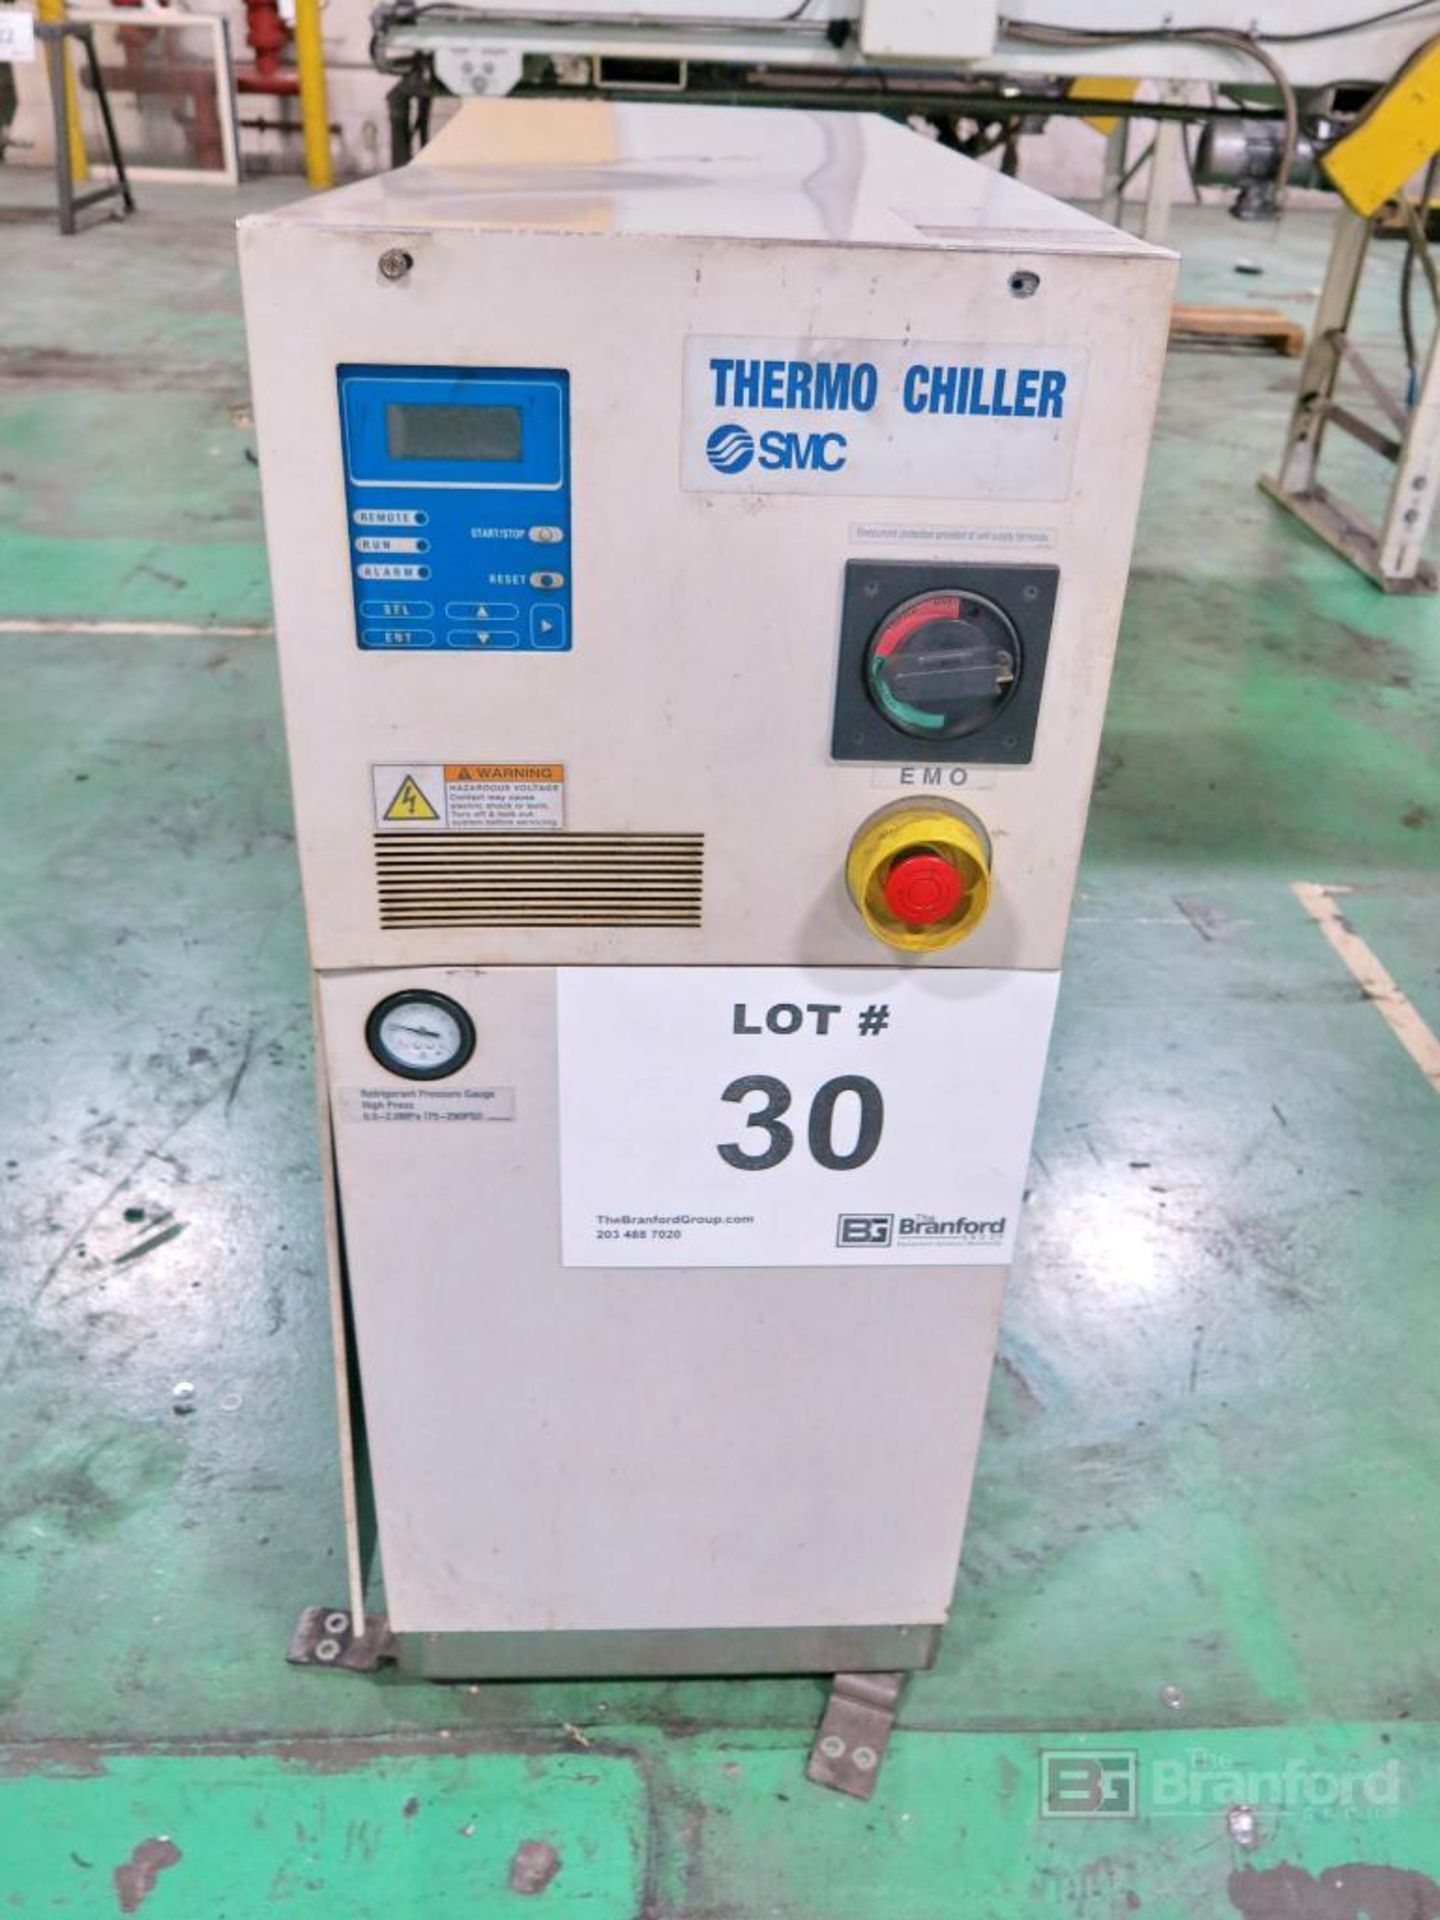 SMC Thermo Chiller Model HRZ008-L1-C - Image 2 of 3